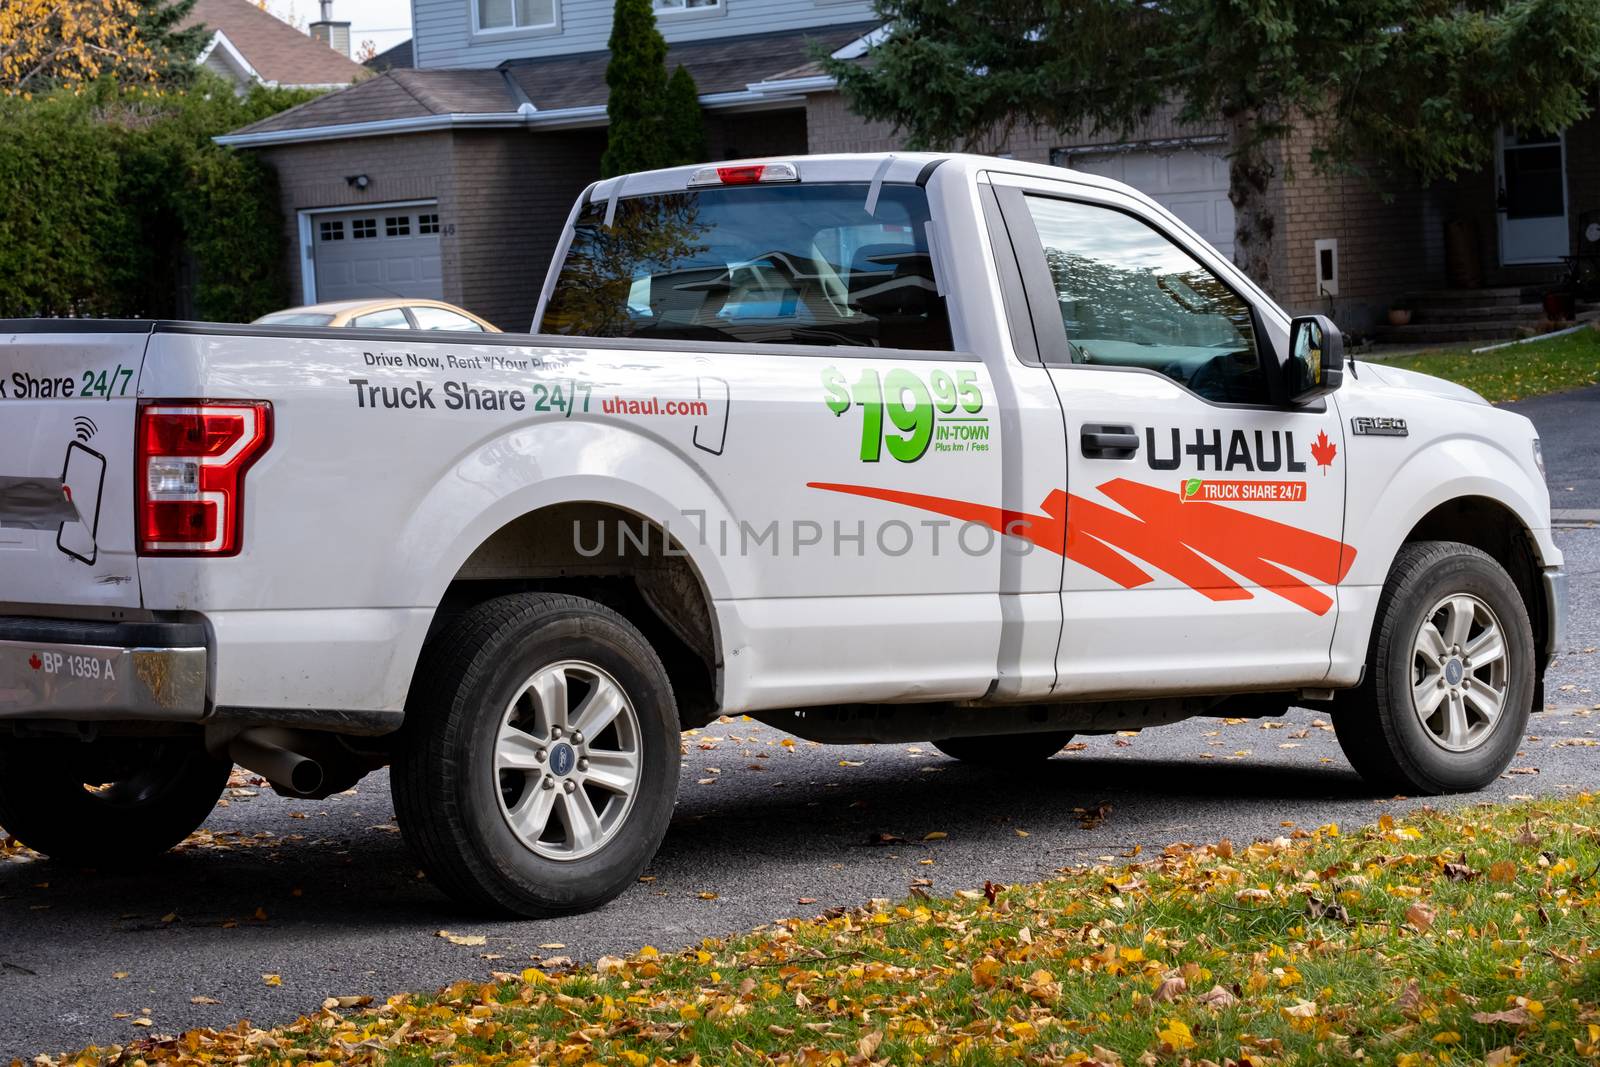 Ottawa, Ontario, Canada - October 25, 2020: A U-Haul rental pick-up truck parked in a suburban driveway.